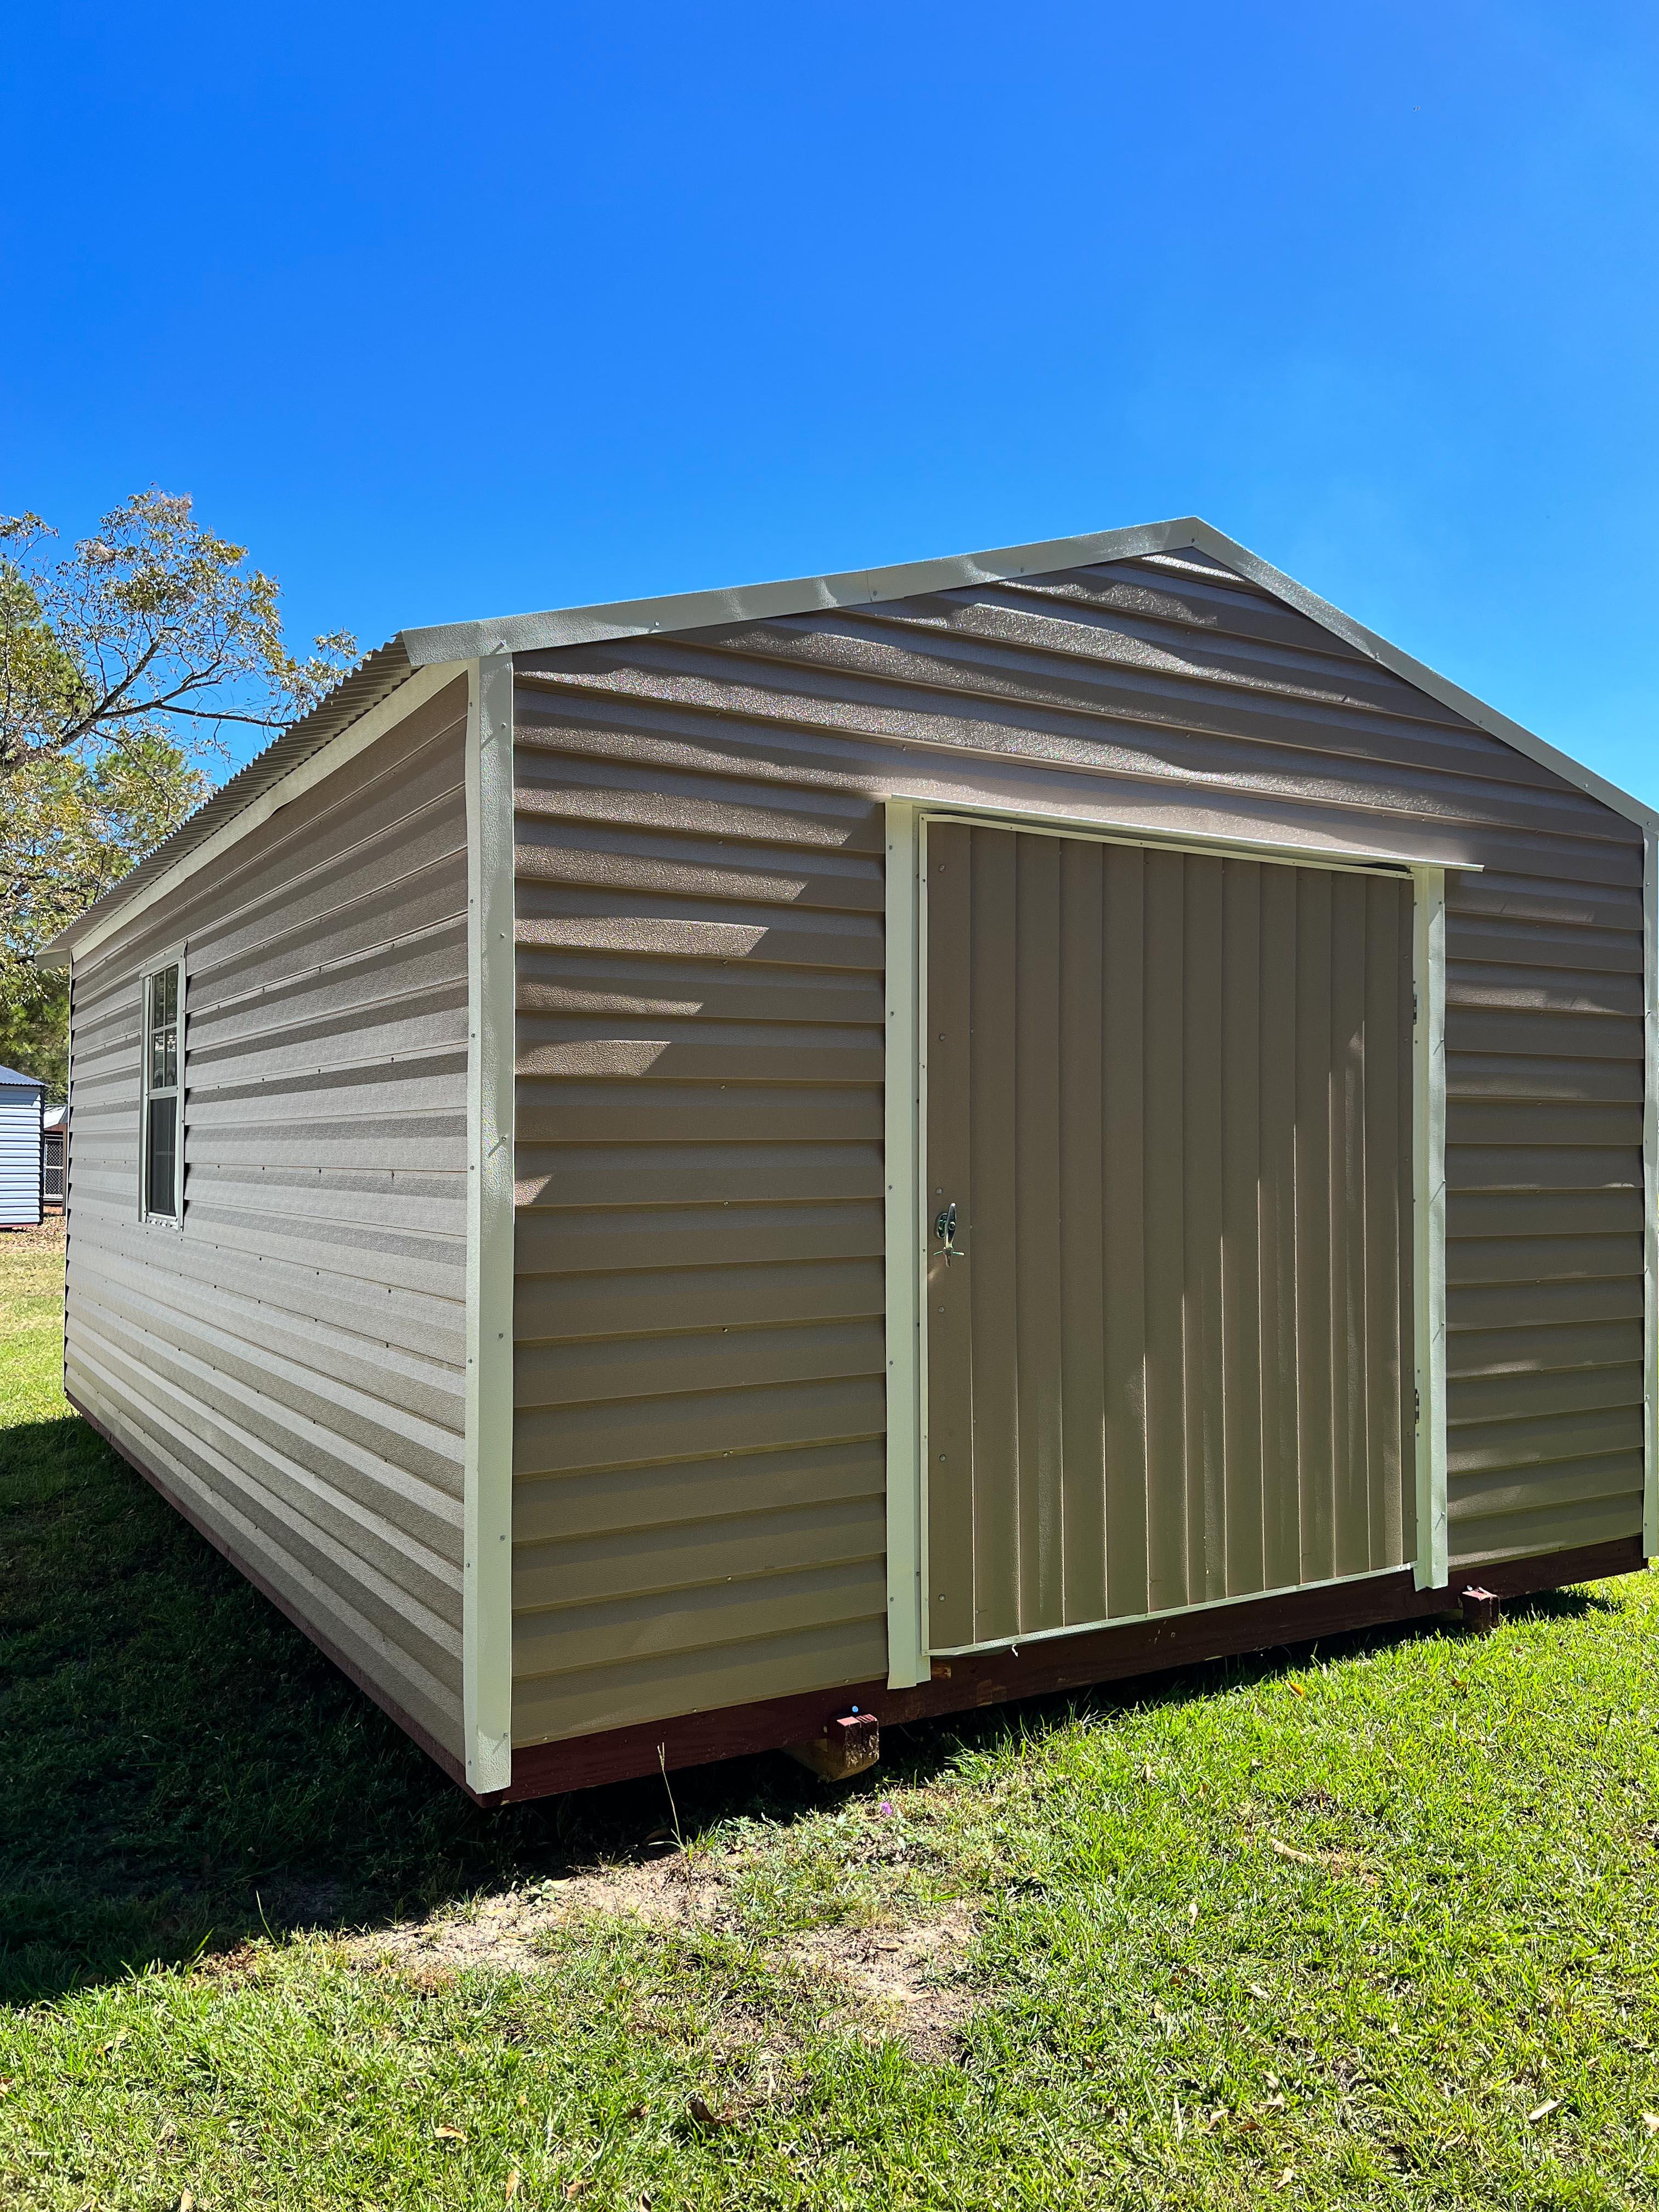 Portable shed with larger door and window